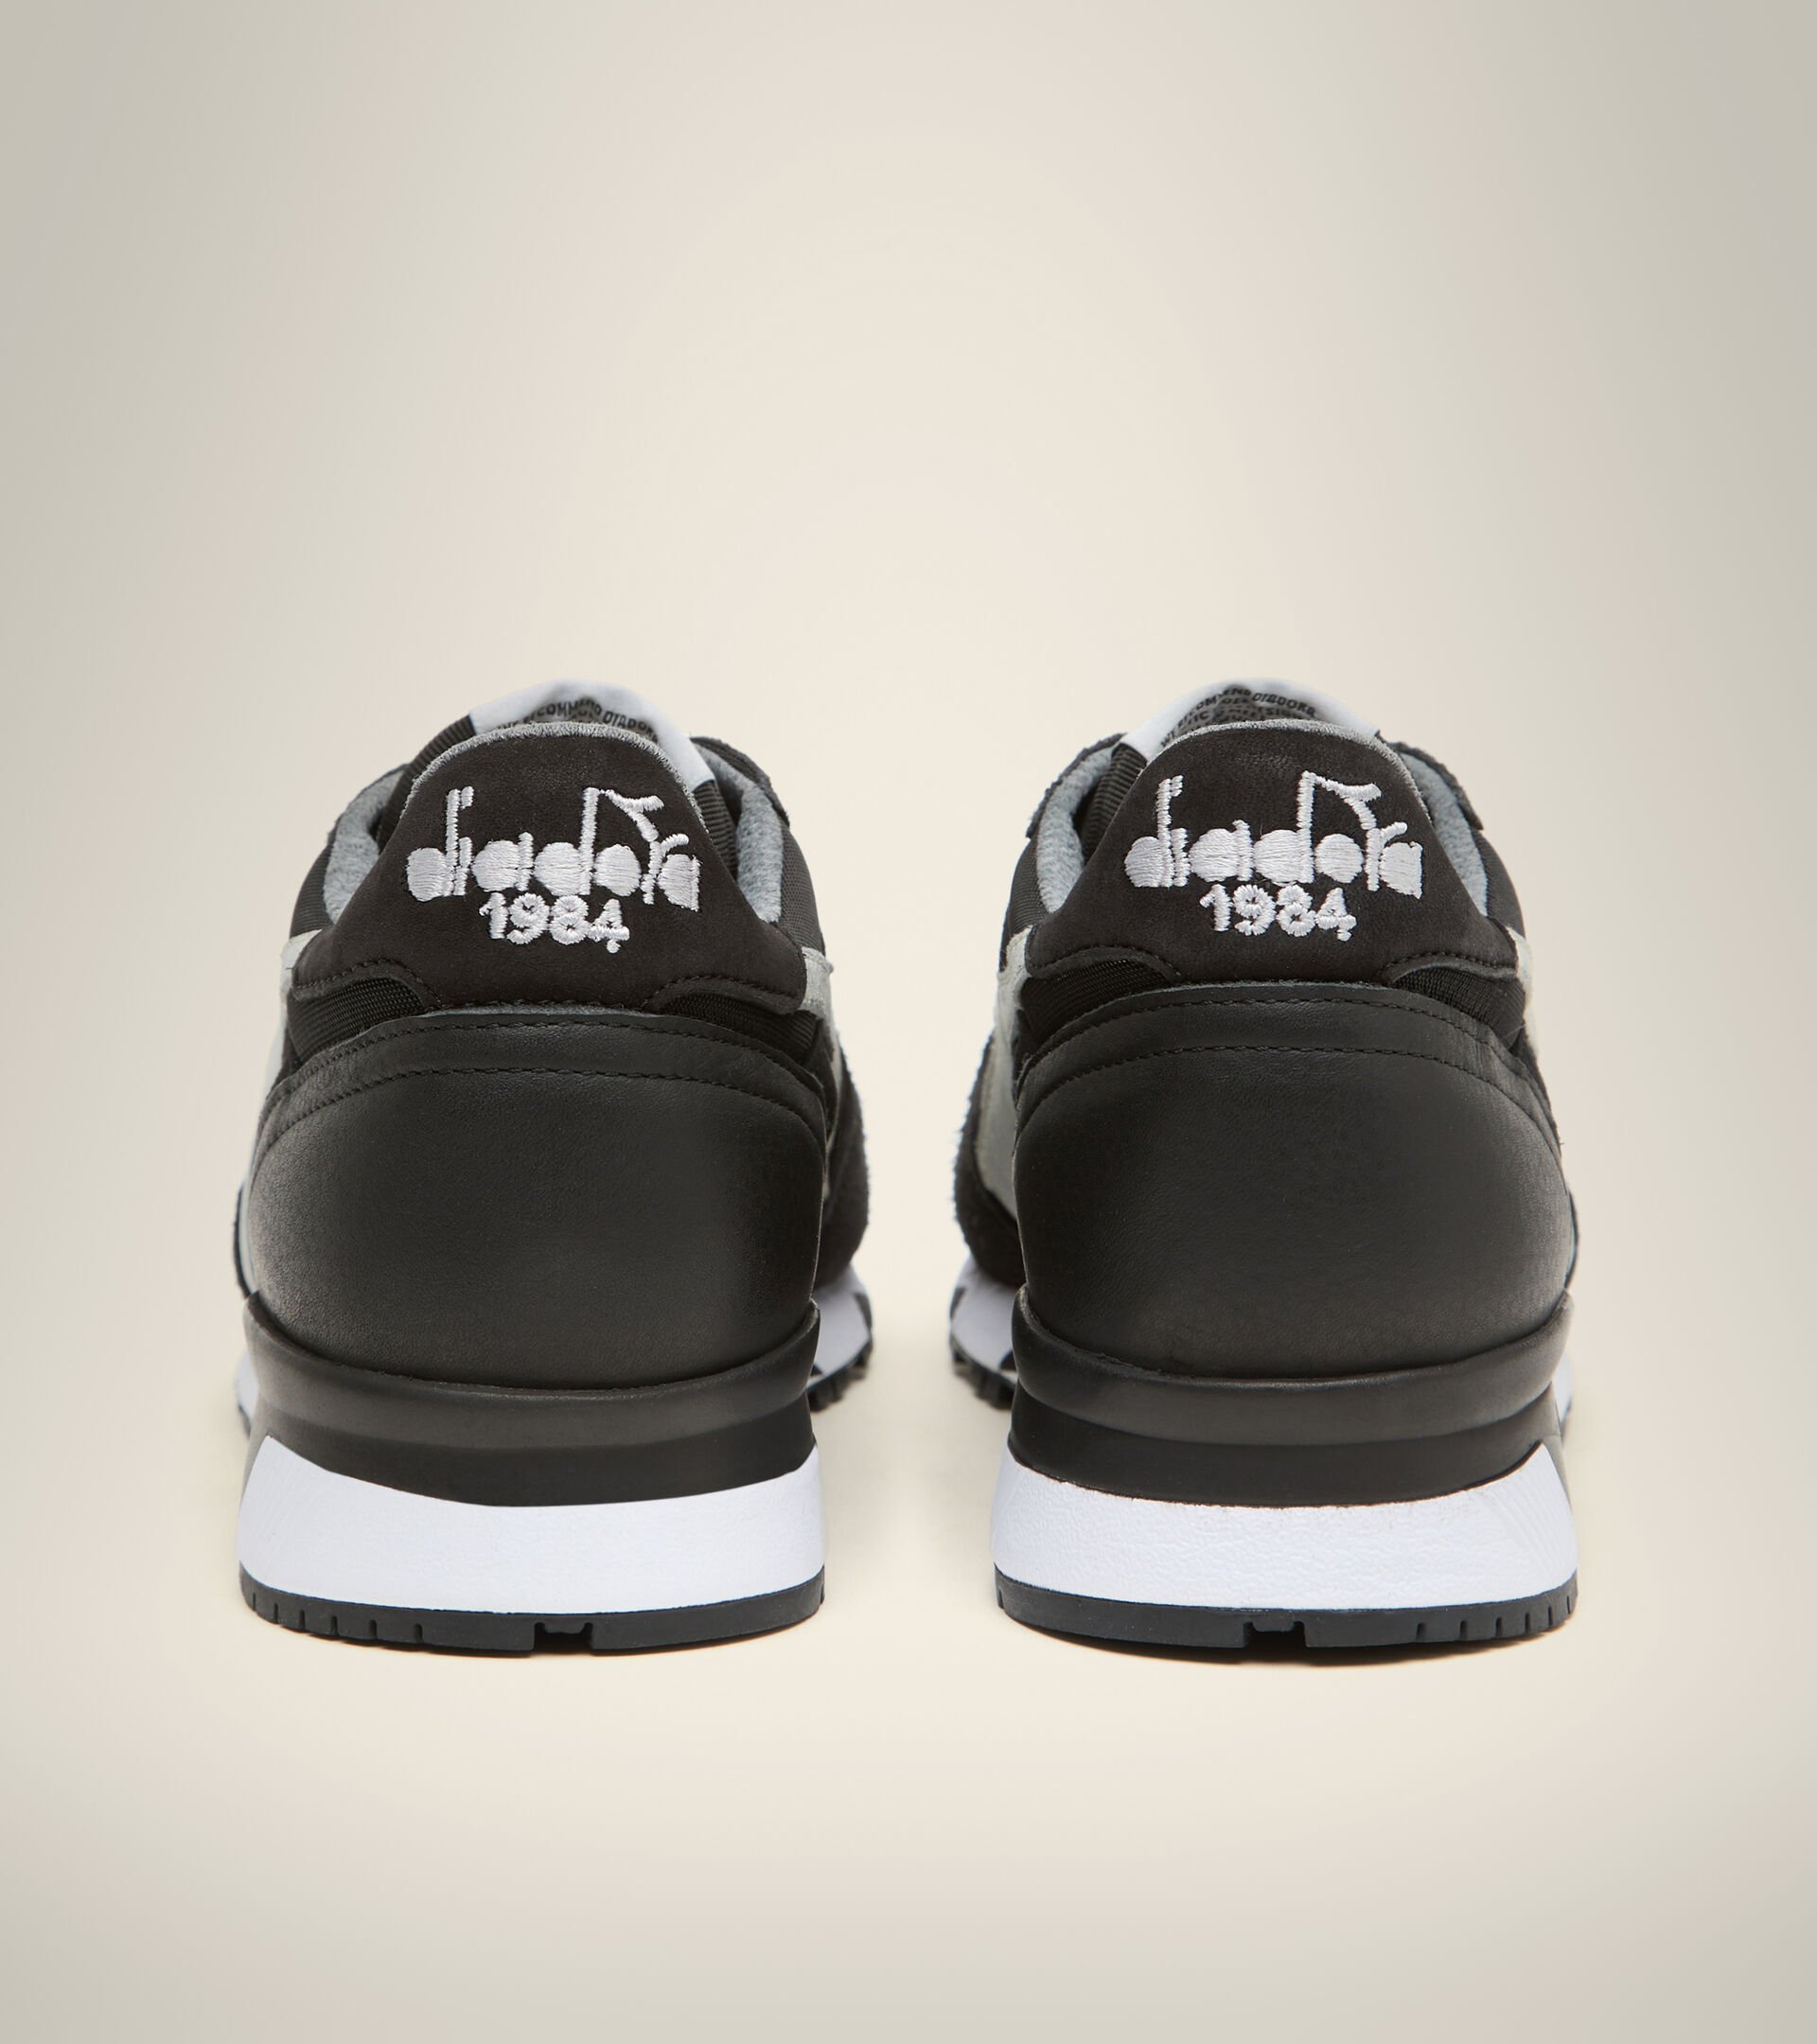 Made in Italy Heritage shoe - Men TRIDENT 90 LEATHER BLACK - Diadora